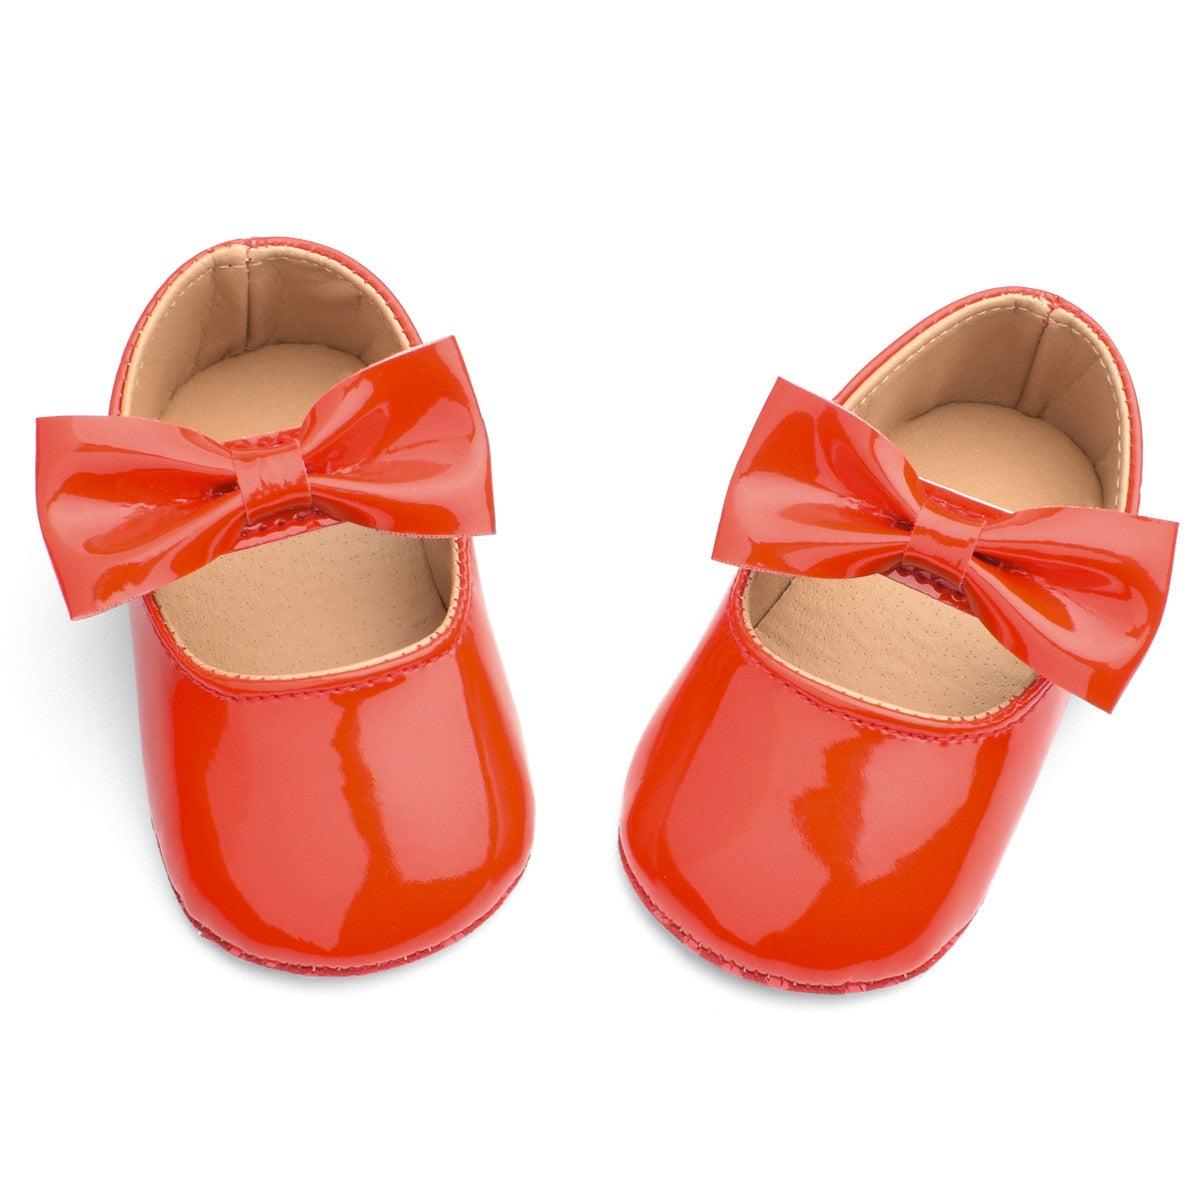 Newborn Baby Girls Shoes PU leather Buckle First Walkers Big Bow Summer Princess Shoes Party Wedding Baby Girl Shoes